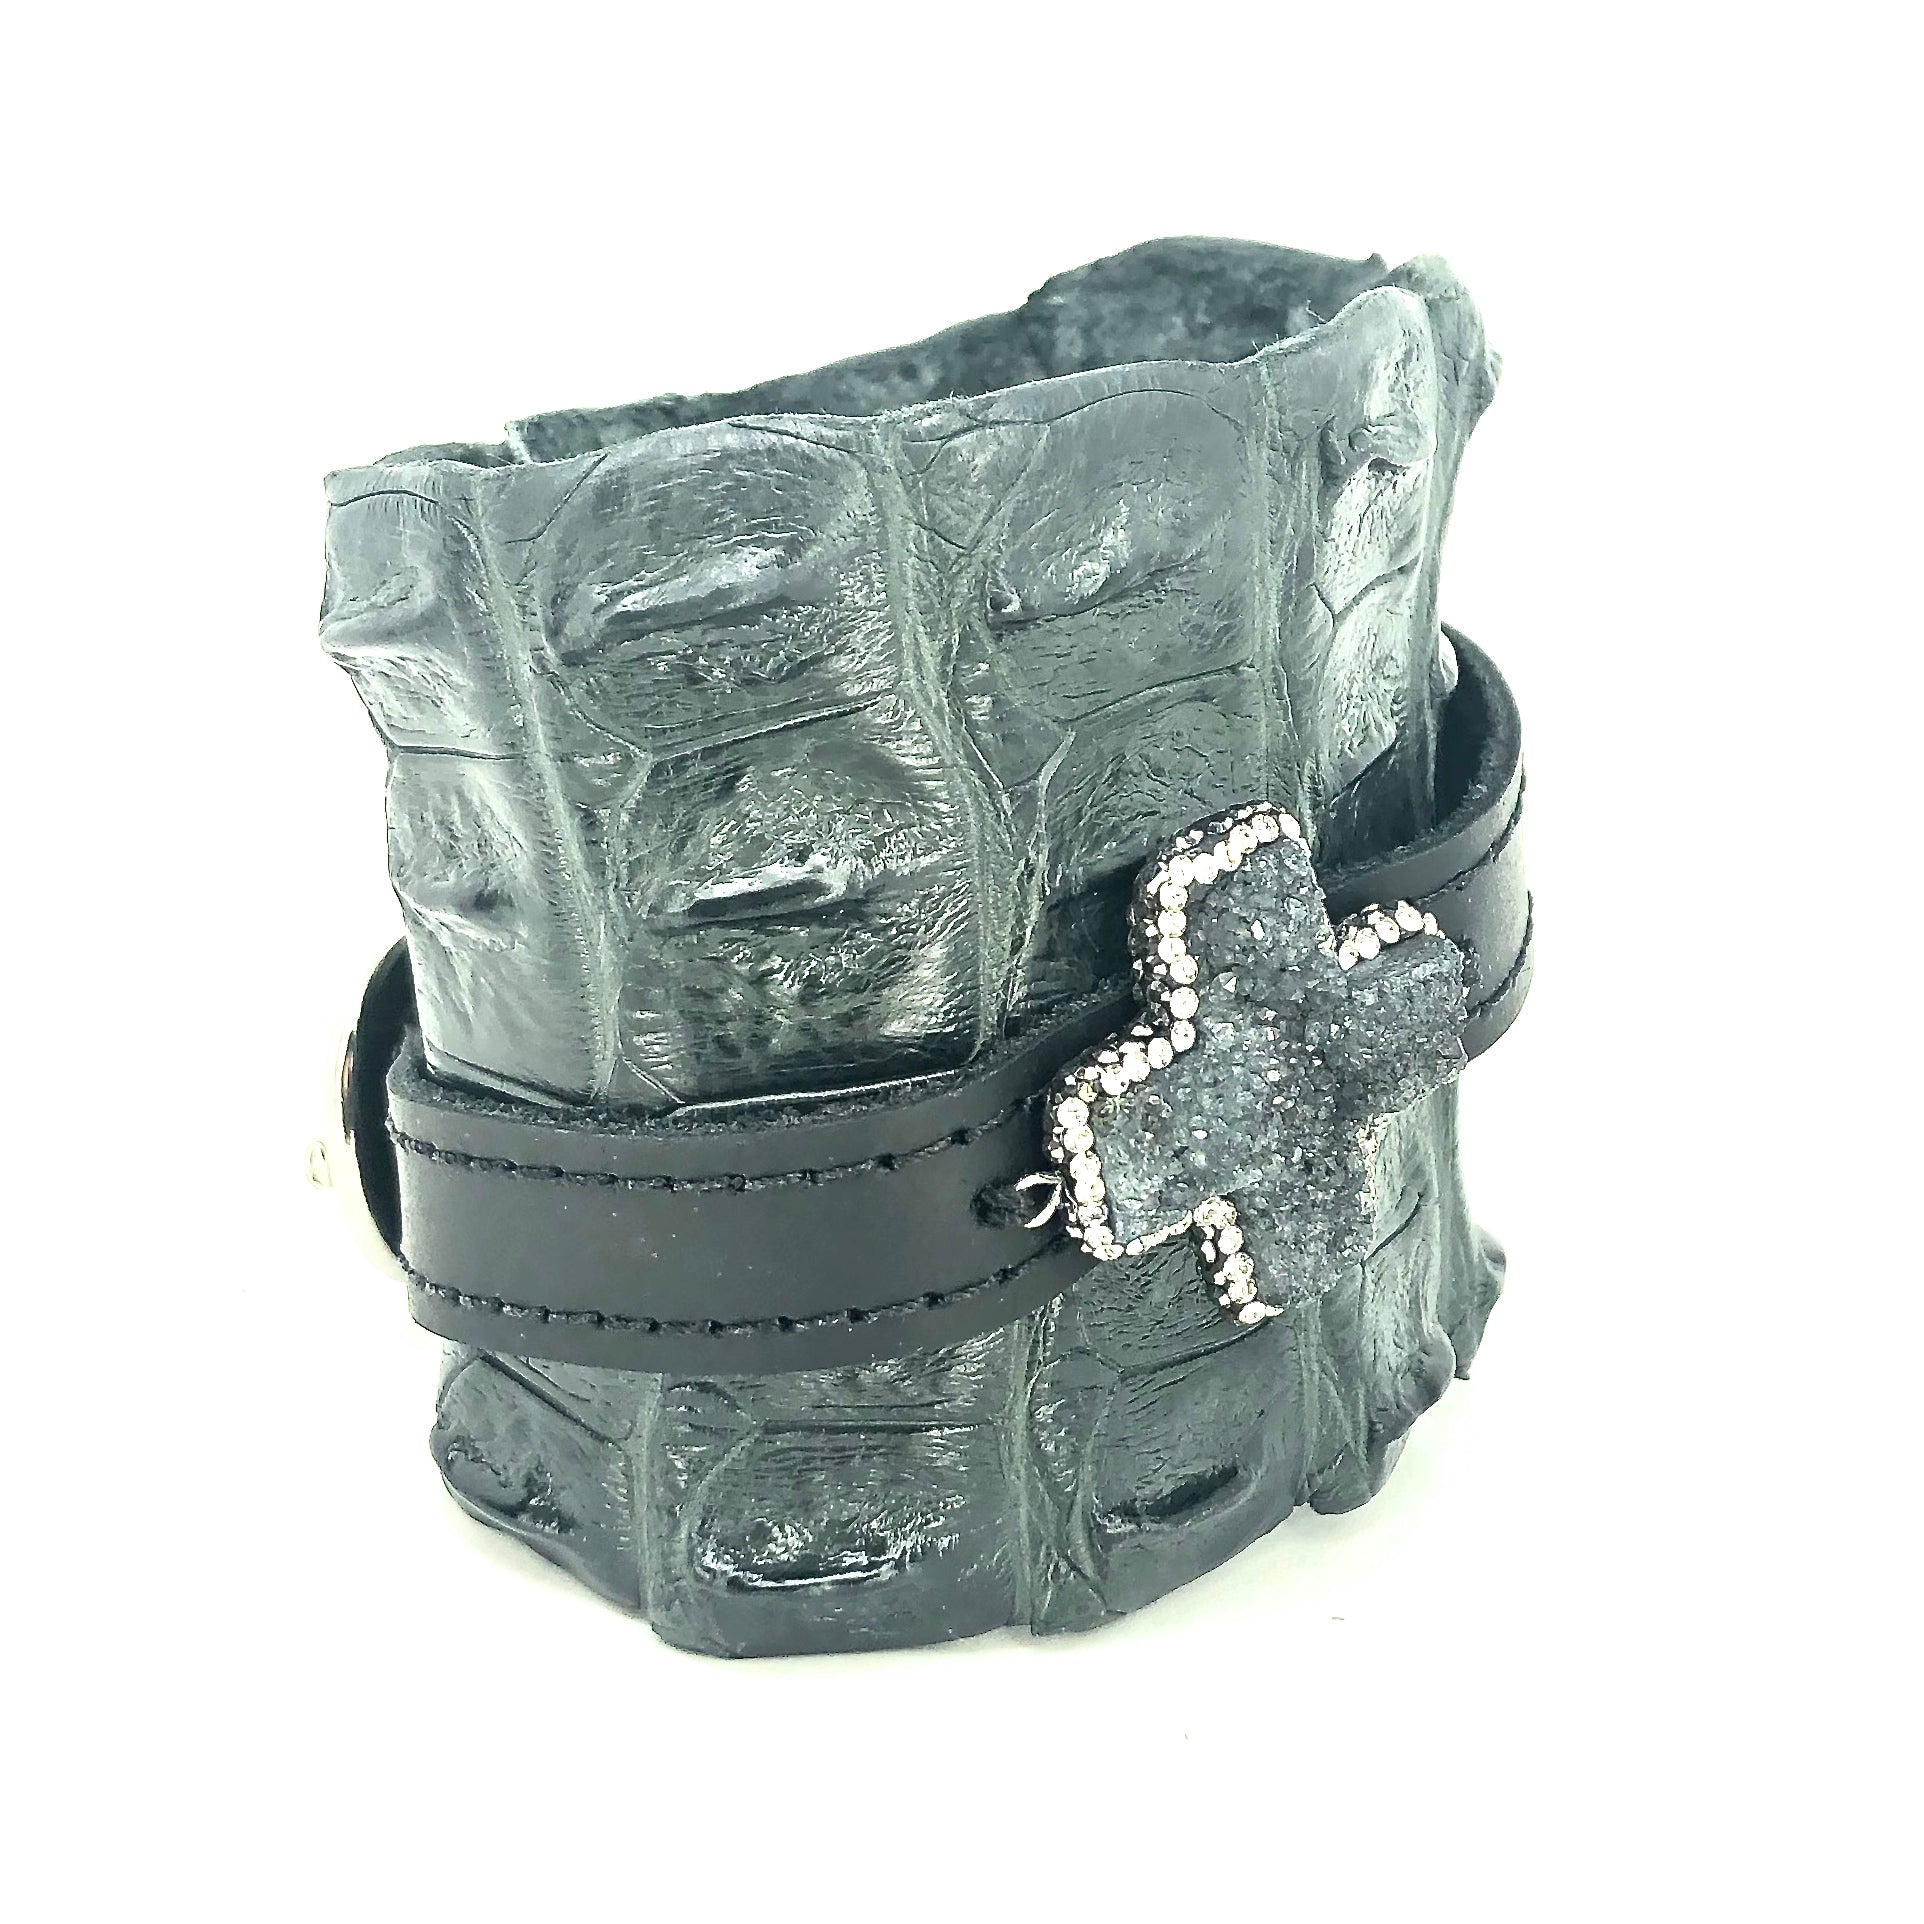 FARM-RAISED CROCODILE LEATHER CUFF WITH PAVE RHINESTONES ADORNMENT AND ADJUSTABLE BUCKLE. by nyet jewelry.